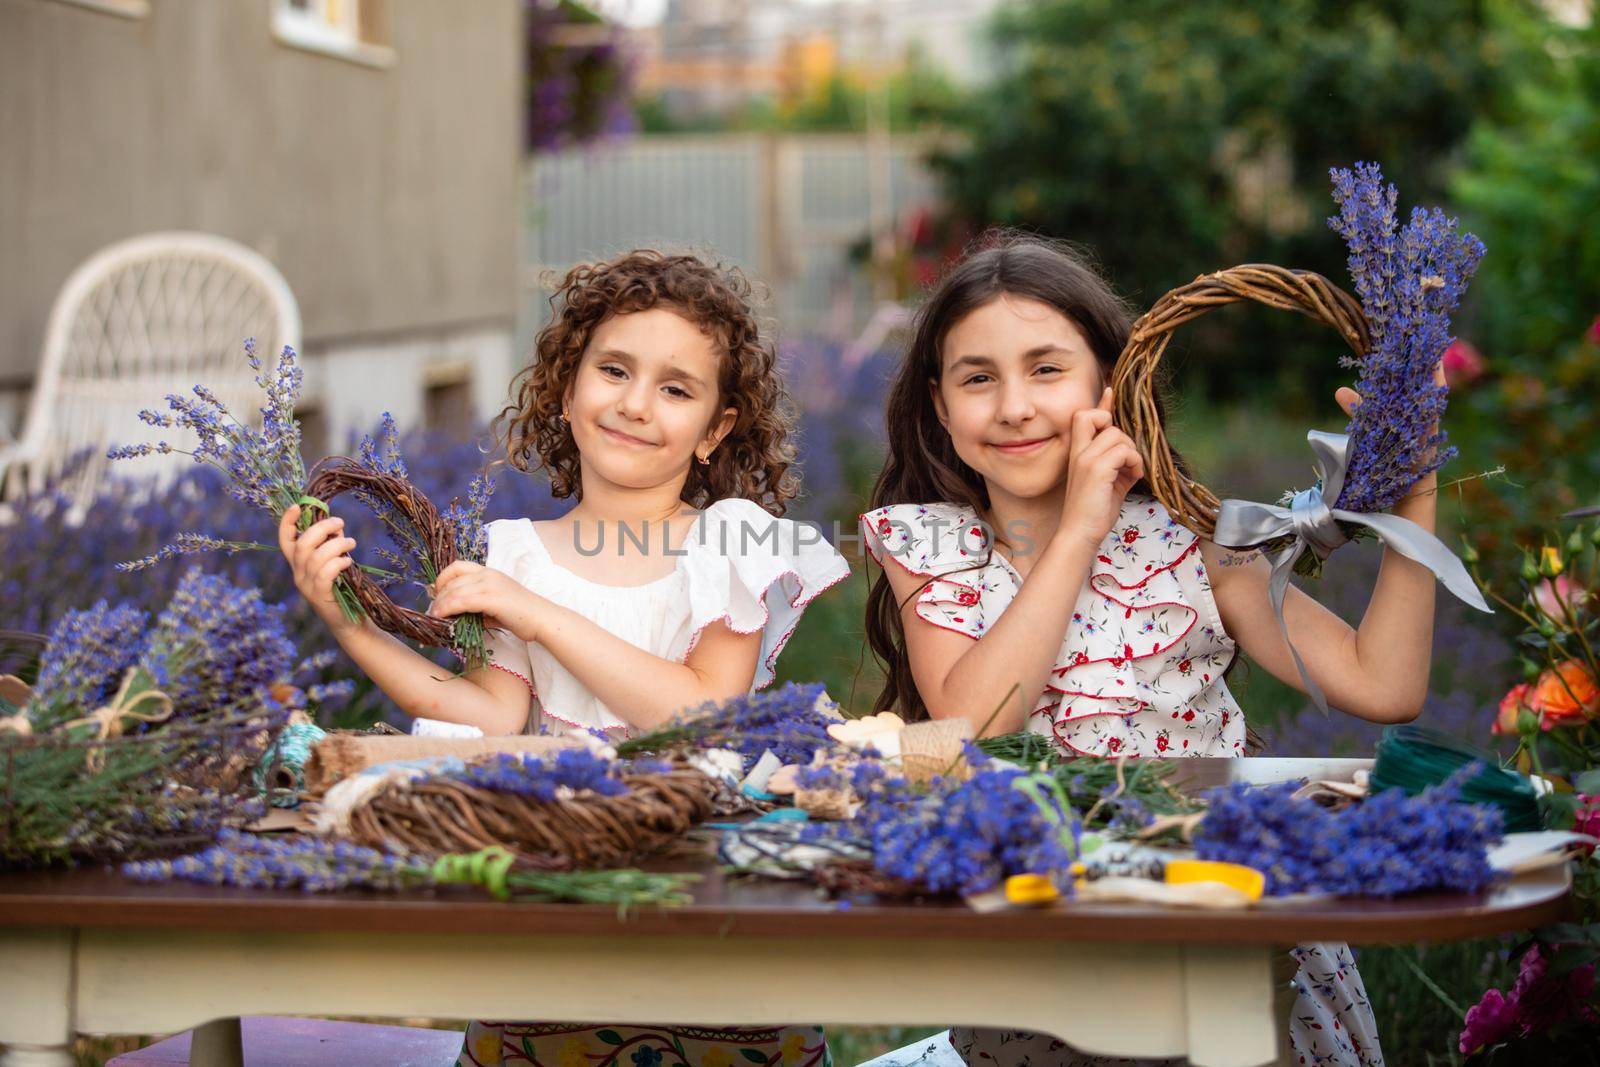 Girls make homemade lavender wreaths as a decor for home or present